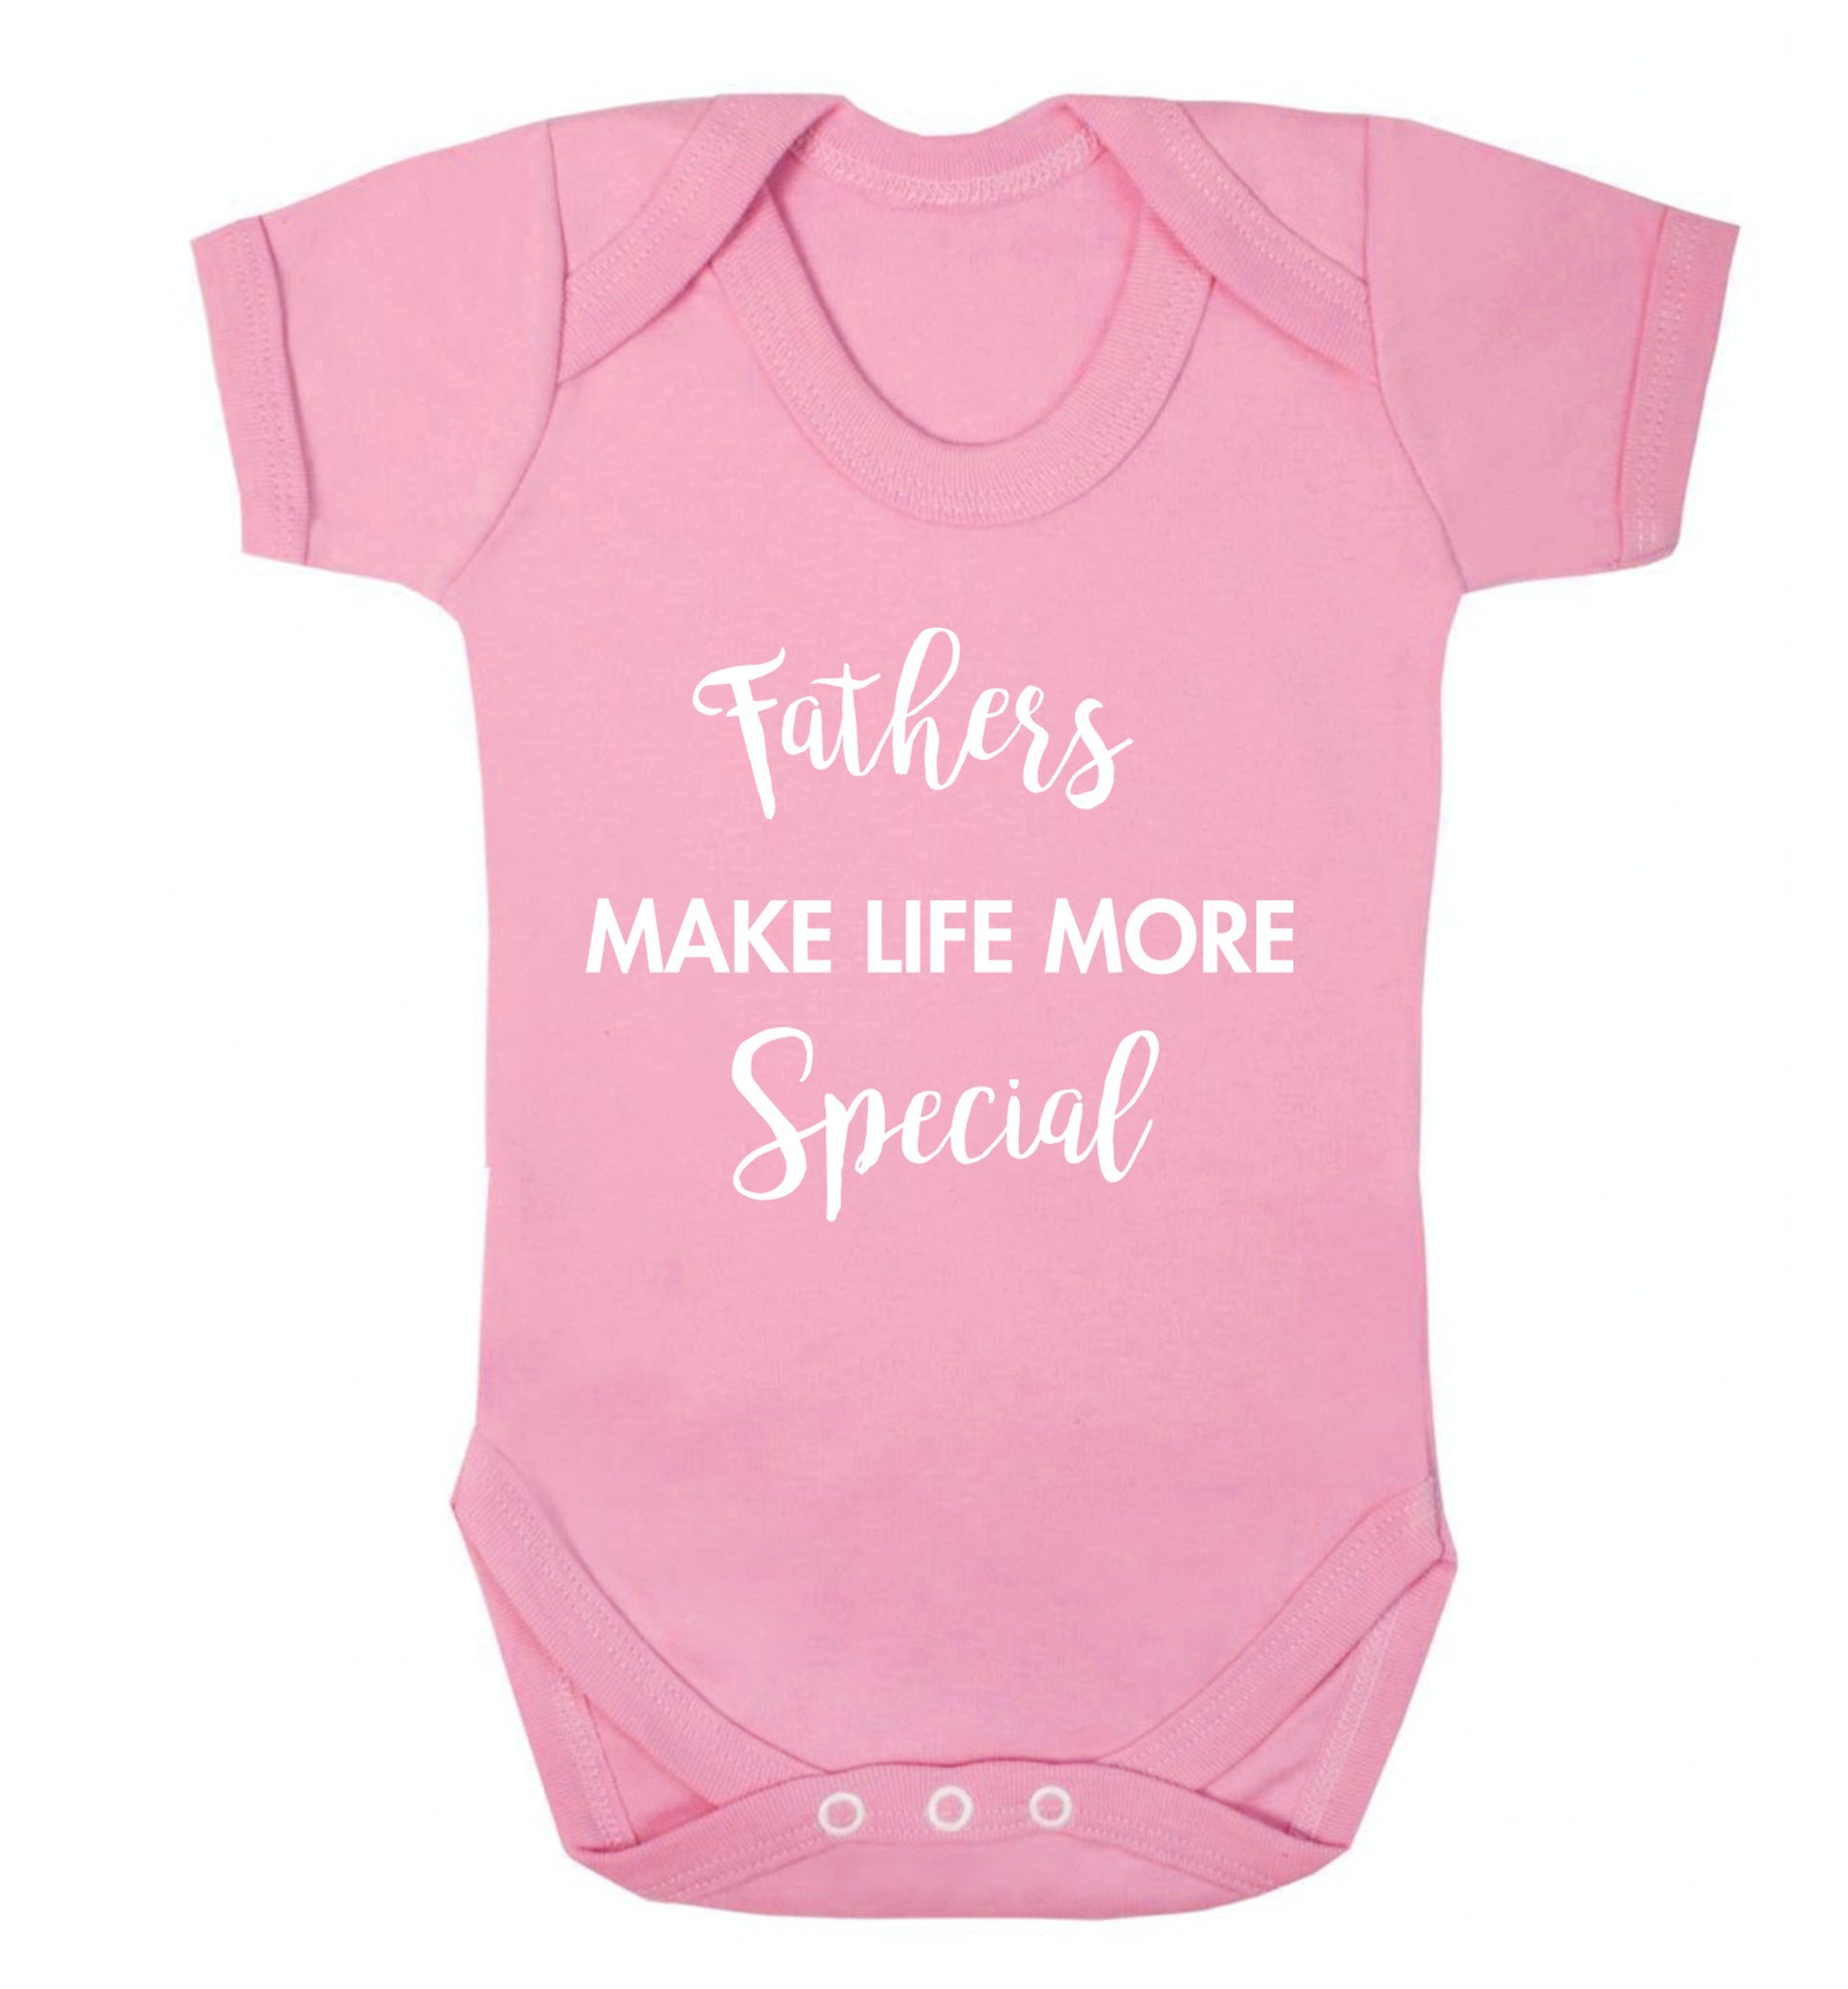 Fathers make life more special Baby Vest pale pink 18-24 months